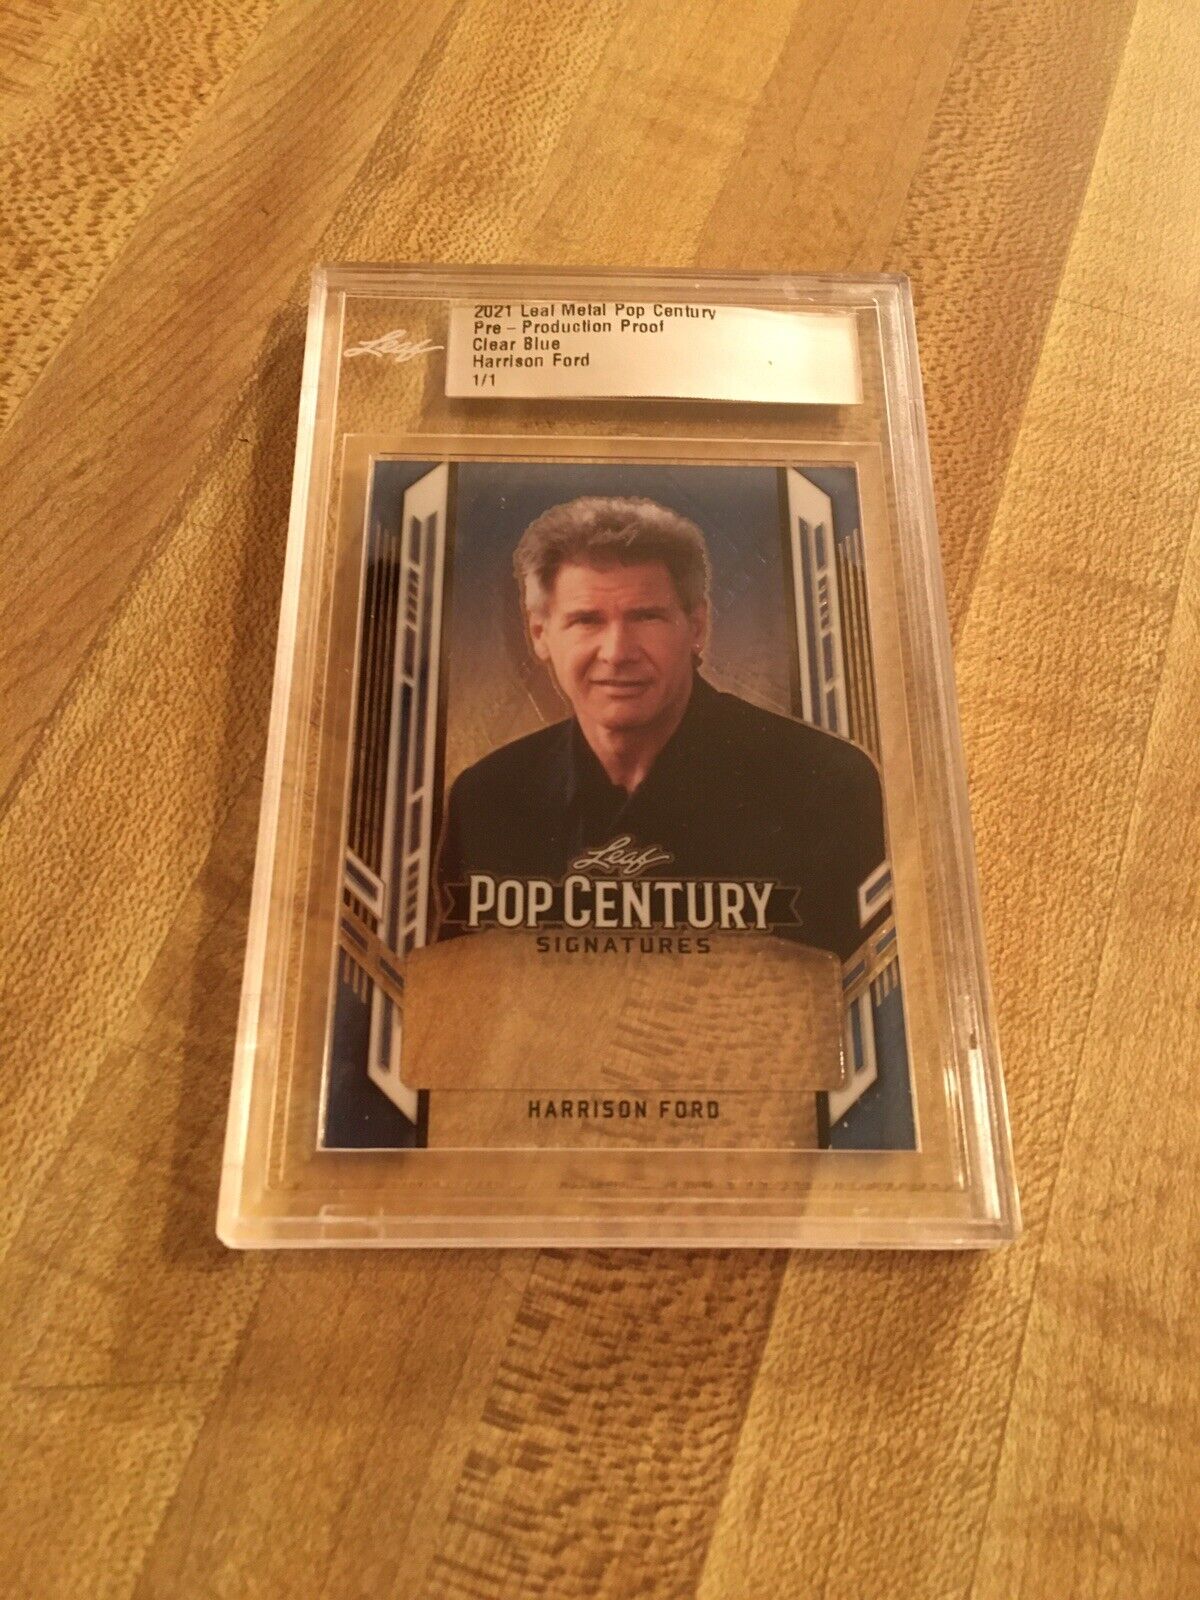 2021 LEAF POP CENTURY PRE-PRODUCTION PROOF 1/1 HARRISON FORD CLEAR BLUE